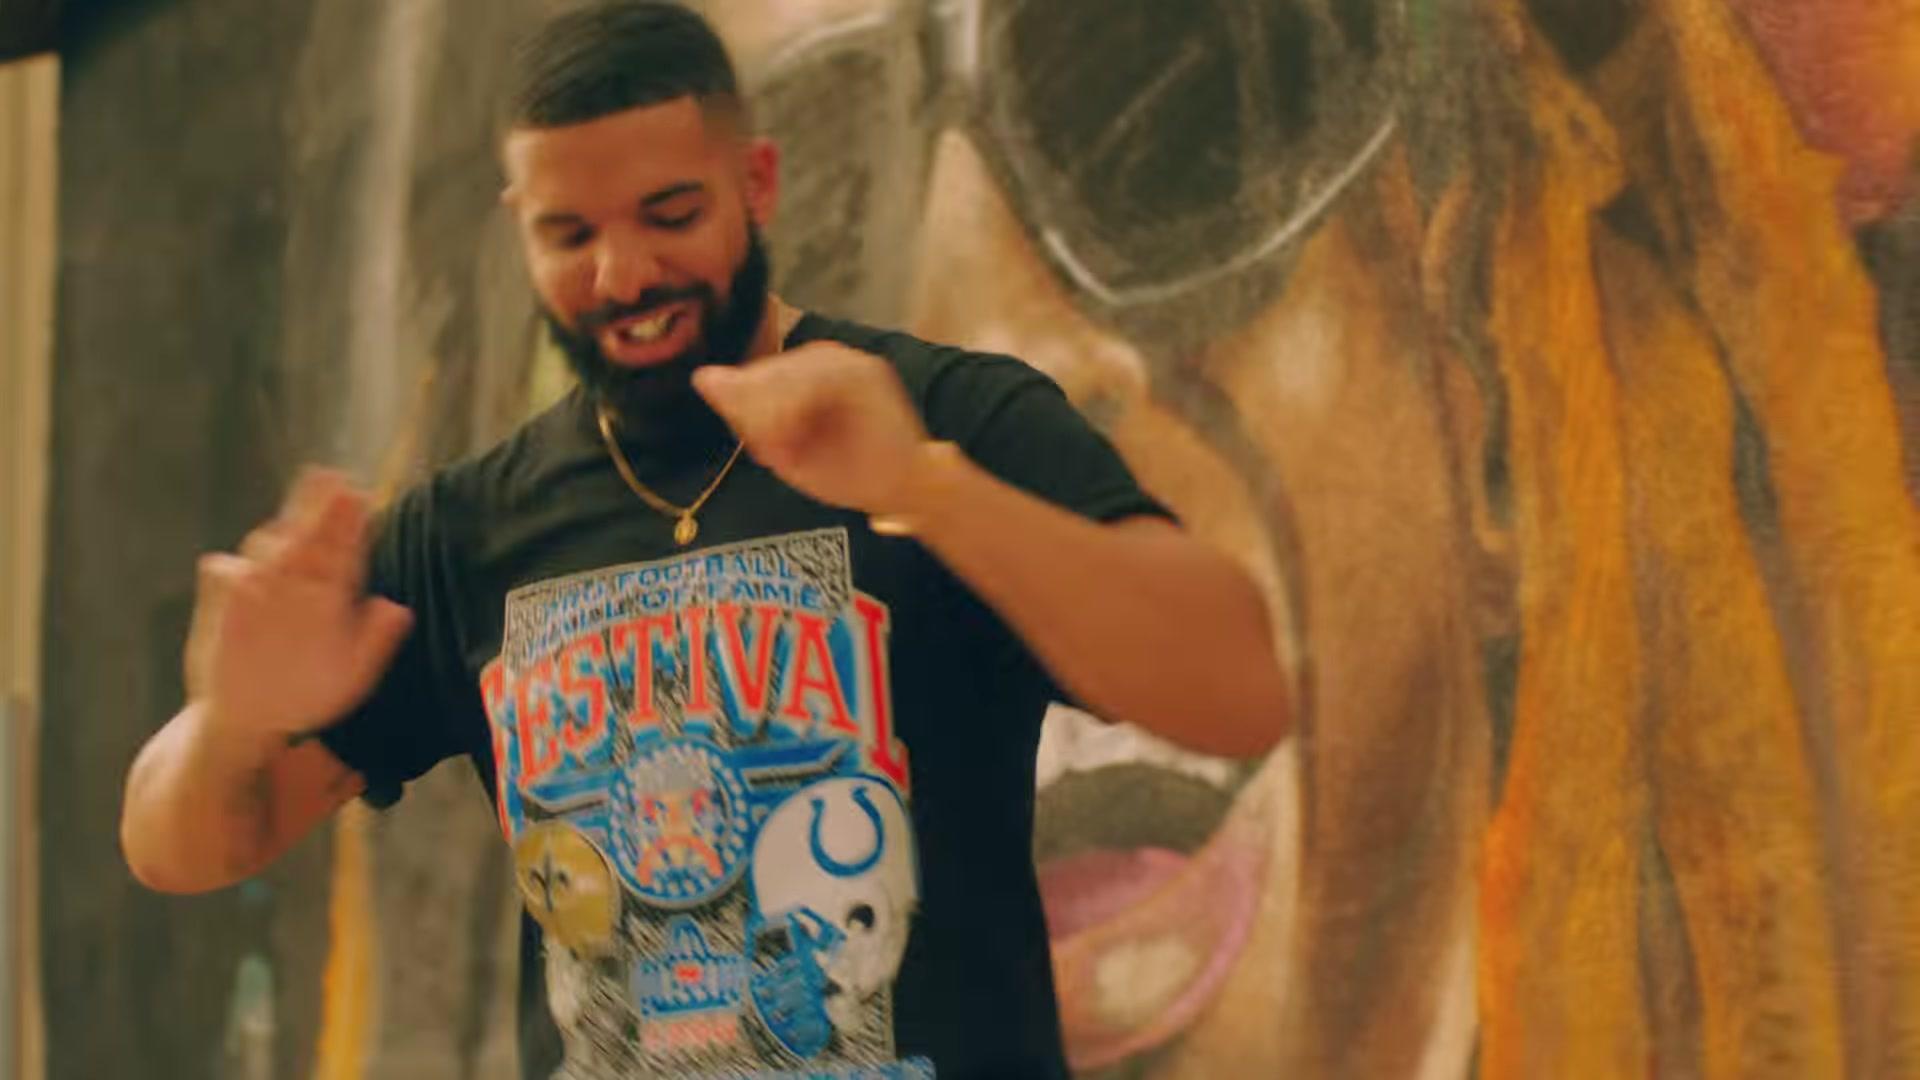 Pro Football Hall Of Fame Festival T Shirt Worn By Drake In “In My